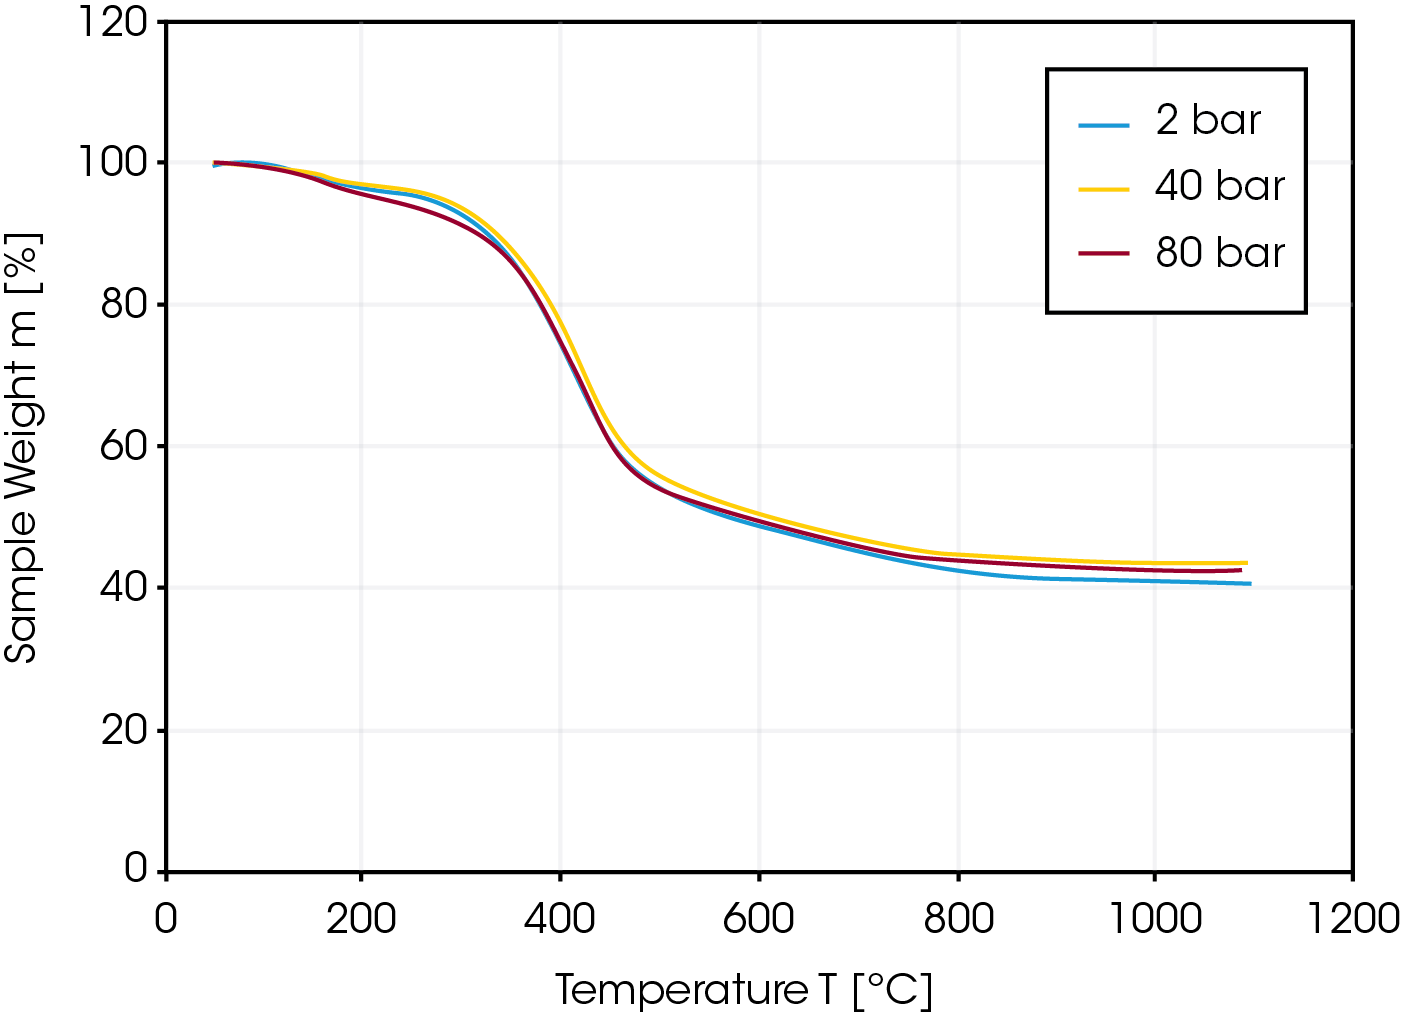 Figure 3. Pyrolysis of lignite in inert argon atmosphere at various pressures of 2, 40 and 80 bar. The heating rate was 10 K/min up to a final temperature of 1100 °C.